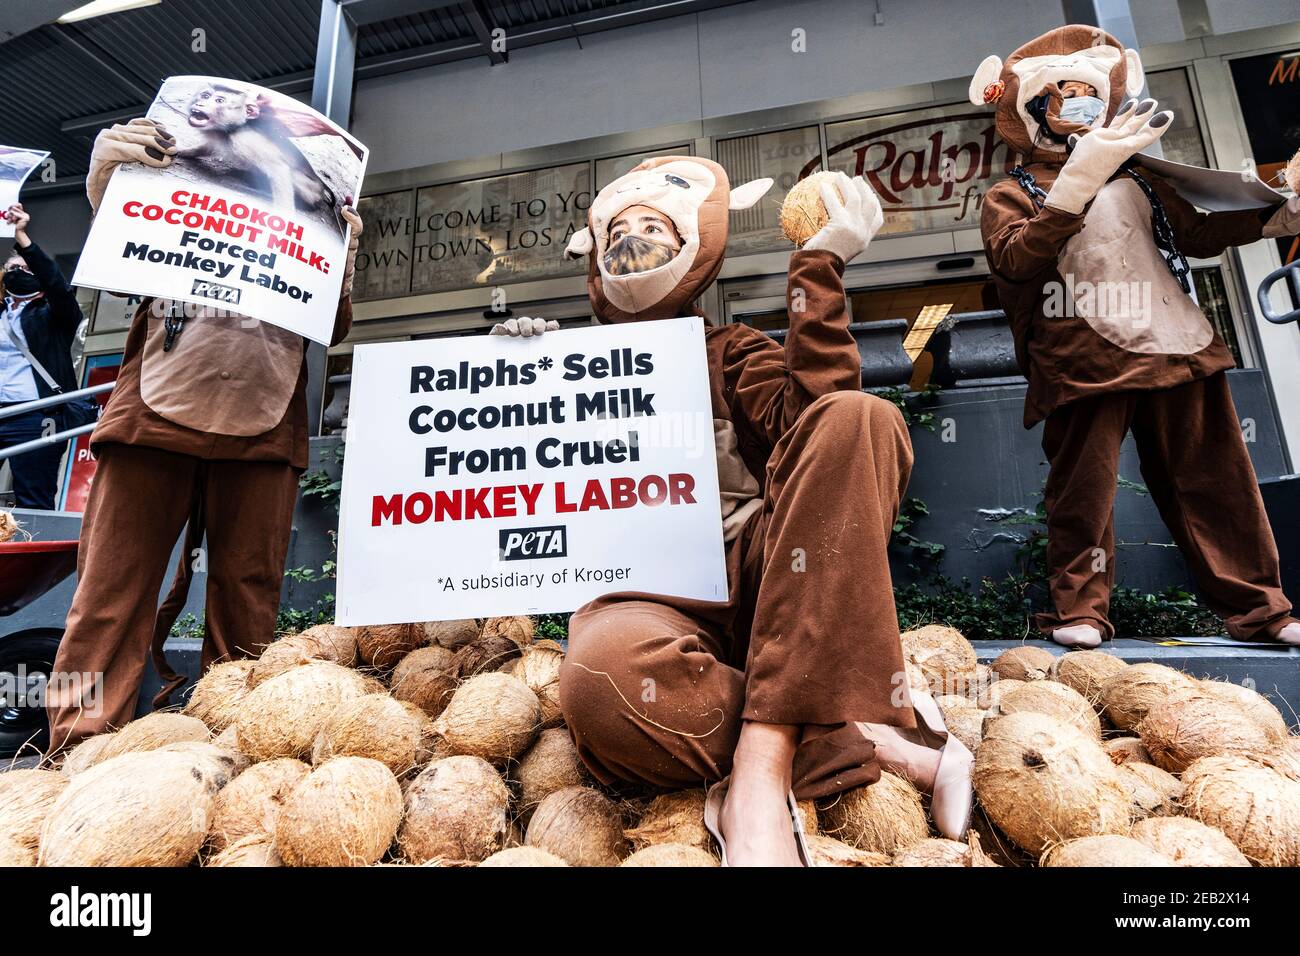 Los Angeles, United States. 11th Feb, 2021. PETA activists dressed in monkey costumes hold placards and coconuts during a protest against Thailand's Chaokoh brand for allegedly forcing monkeys to climb up trees to collect coconuts and keeping them in cruel conditions. Major U.S. retailers such as Costco and Target stopped selling Chaokoh coconut milk over allegations of forced monkey labor. Credit: SOPA Images Limited/Alamy Live News Stock Photo